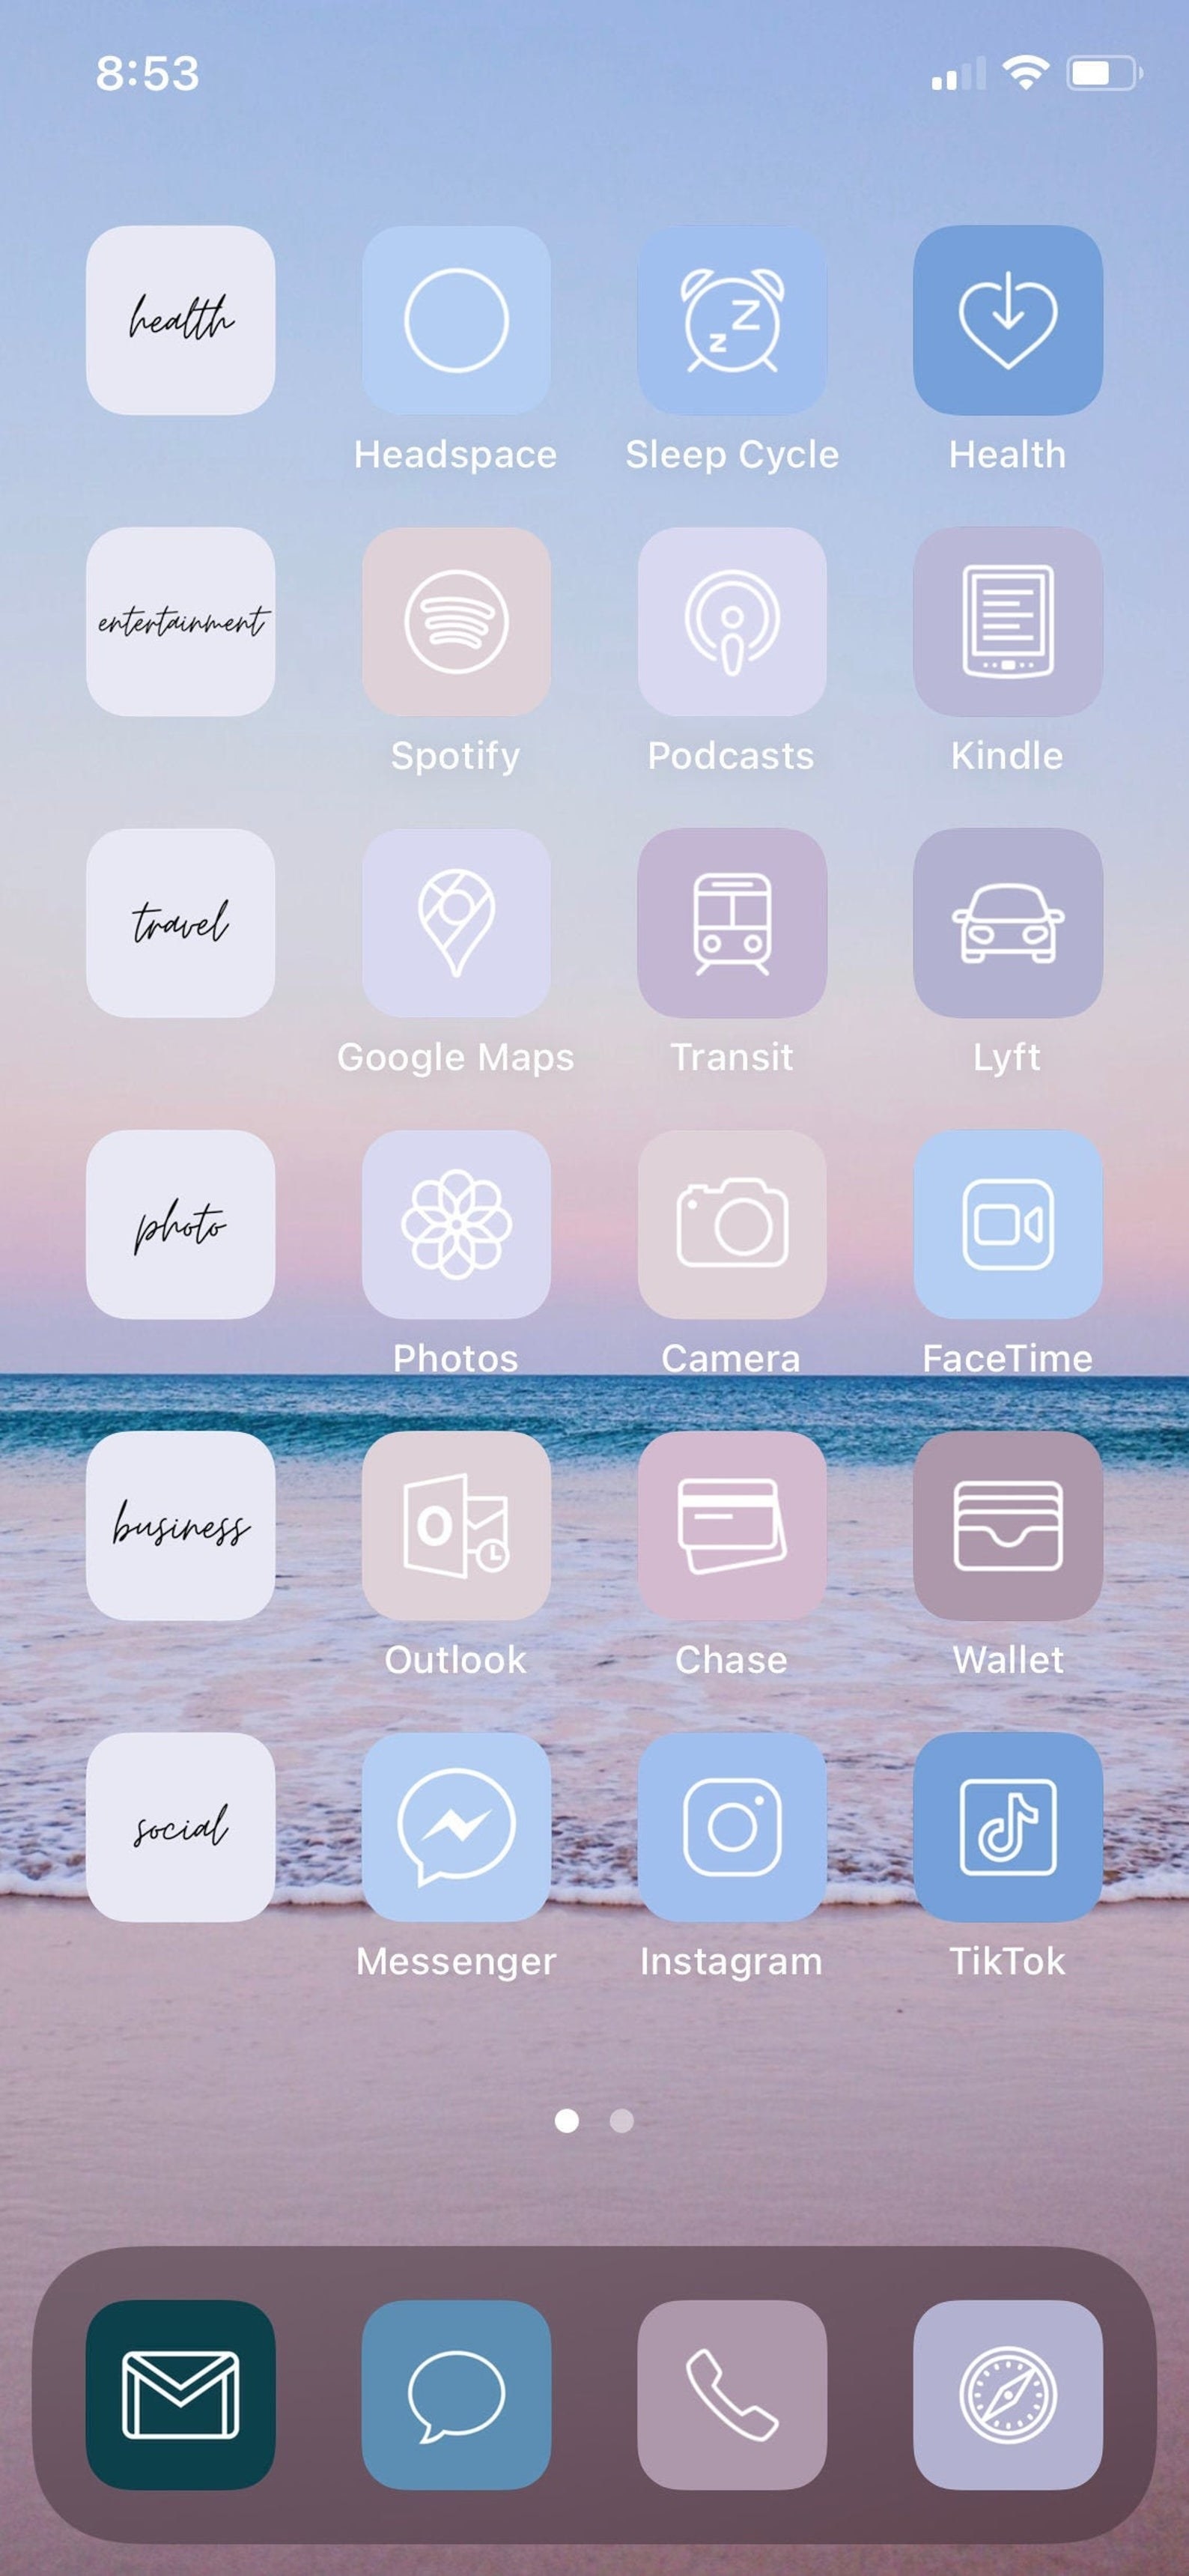 Ios14 Aesthetic App Icon Themes 1000 cute mail icon free vectors on ai, svg, eps or cdr. ios14 aesthetic app icon themes